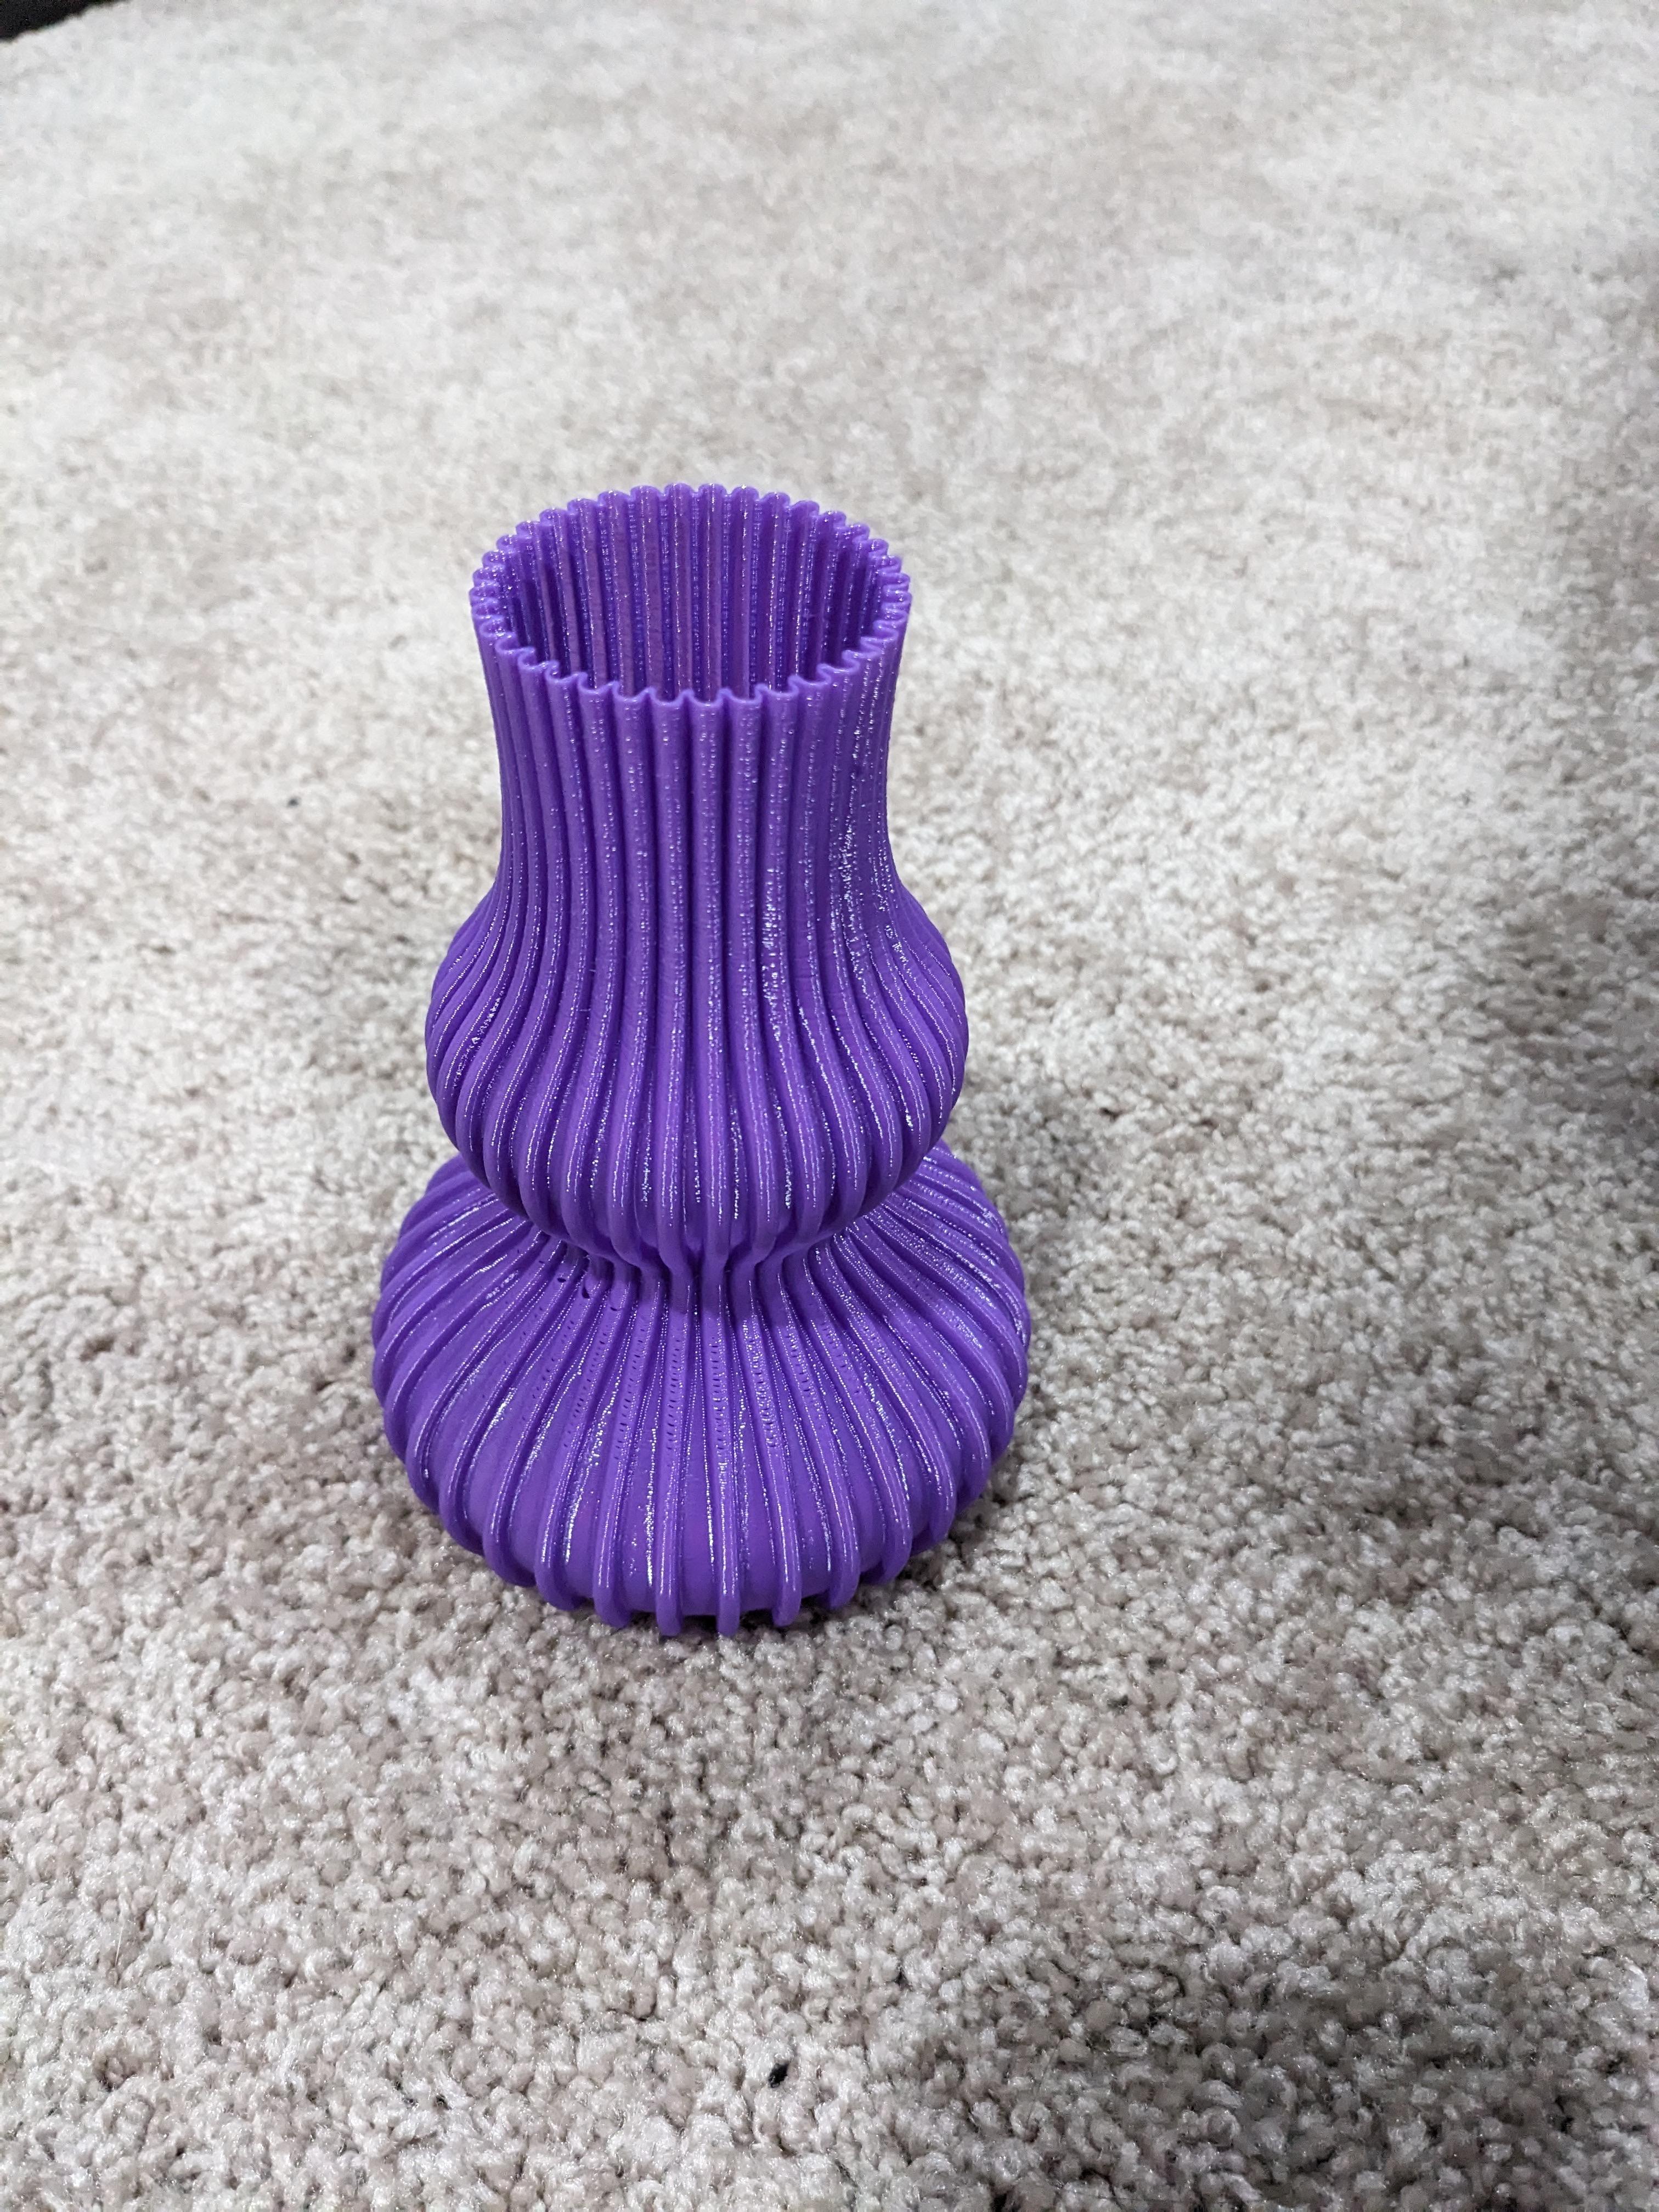 Vase 3.3.0 - Printed with TPU in vase mode, turned out pretty well! - 3d model